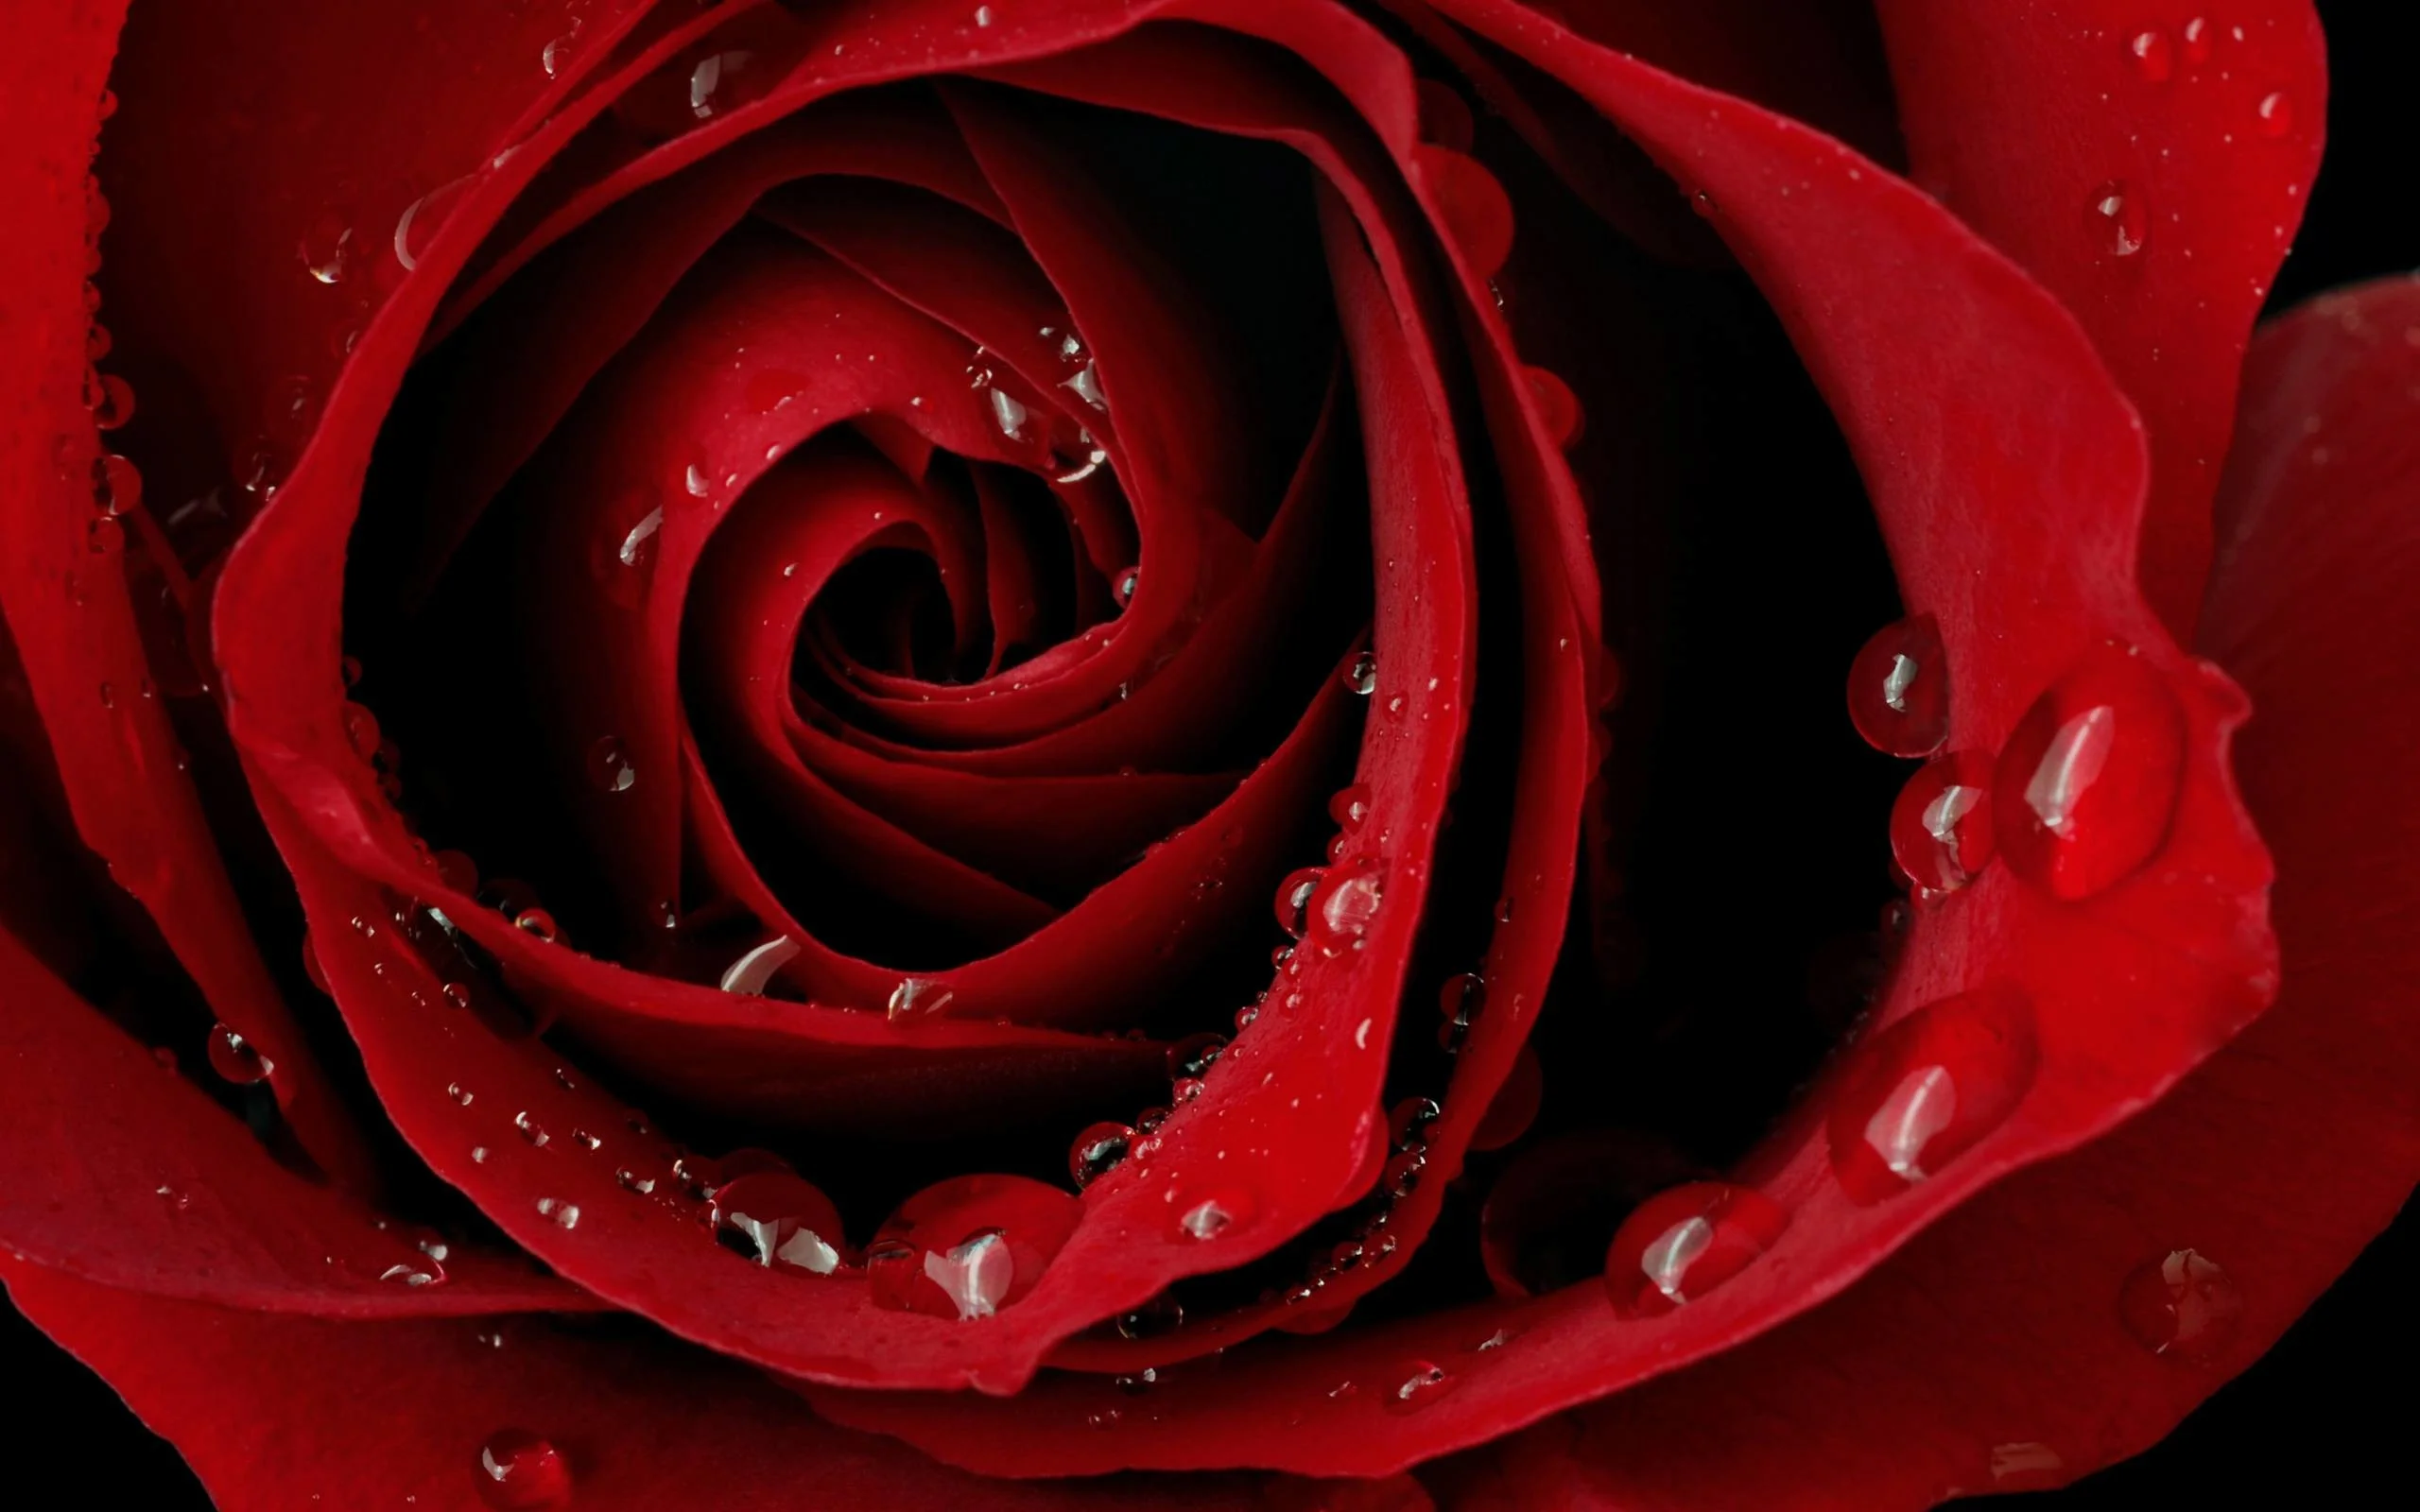 Beautiful fresh red rose wallpapers – DriverLayer Search Engine